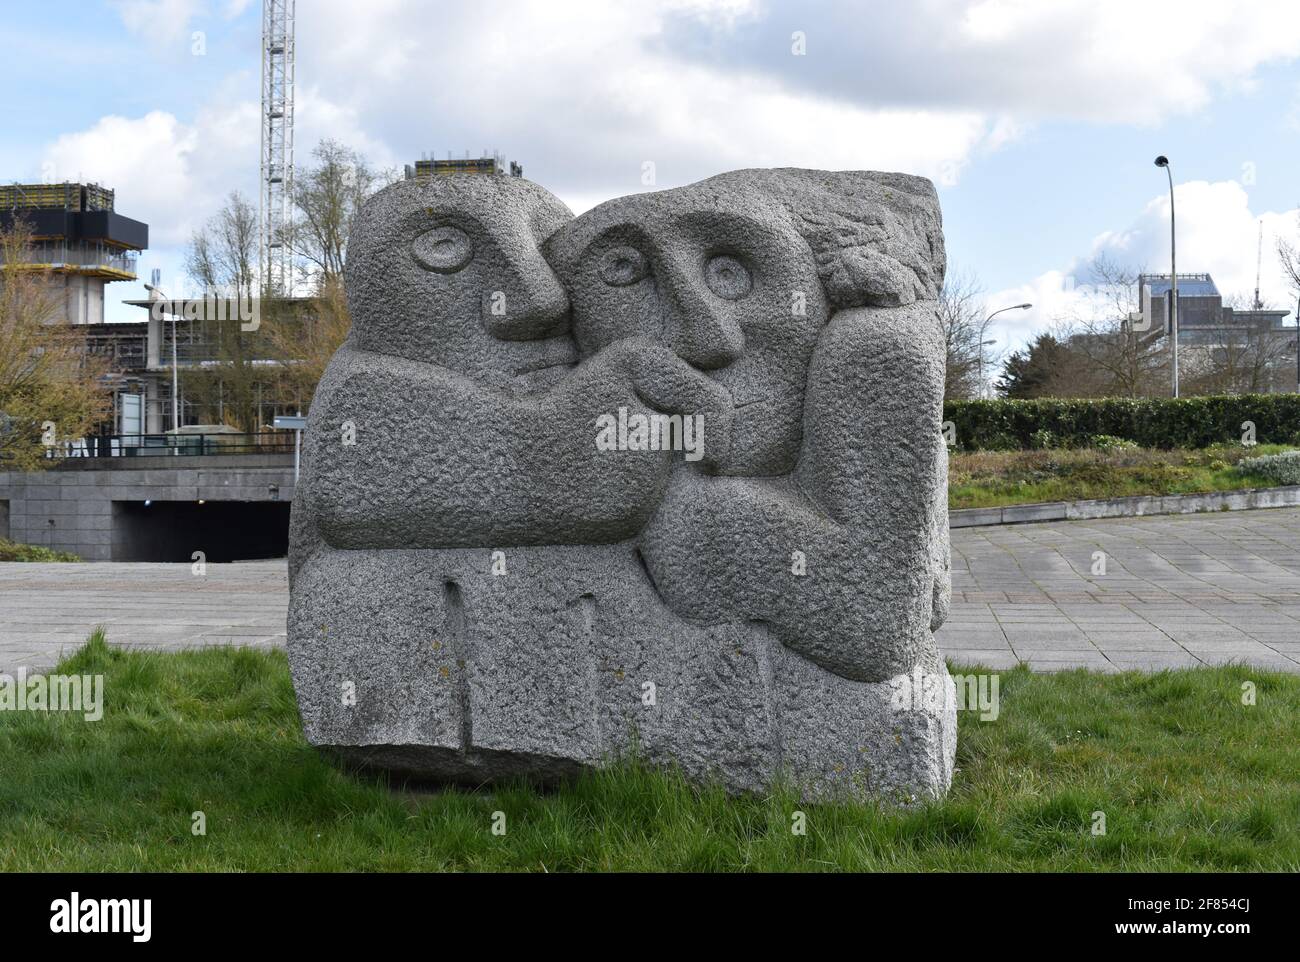 A sculpture at Milton Keynes Station Plaza, called 'O Wert thou in the cauld blast' by Ronald Rae. Stock Photo